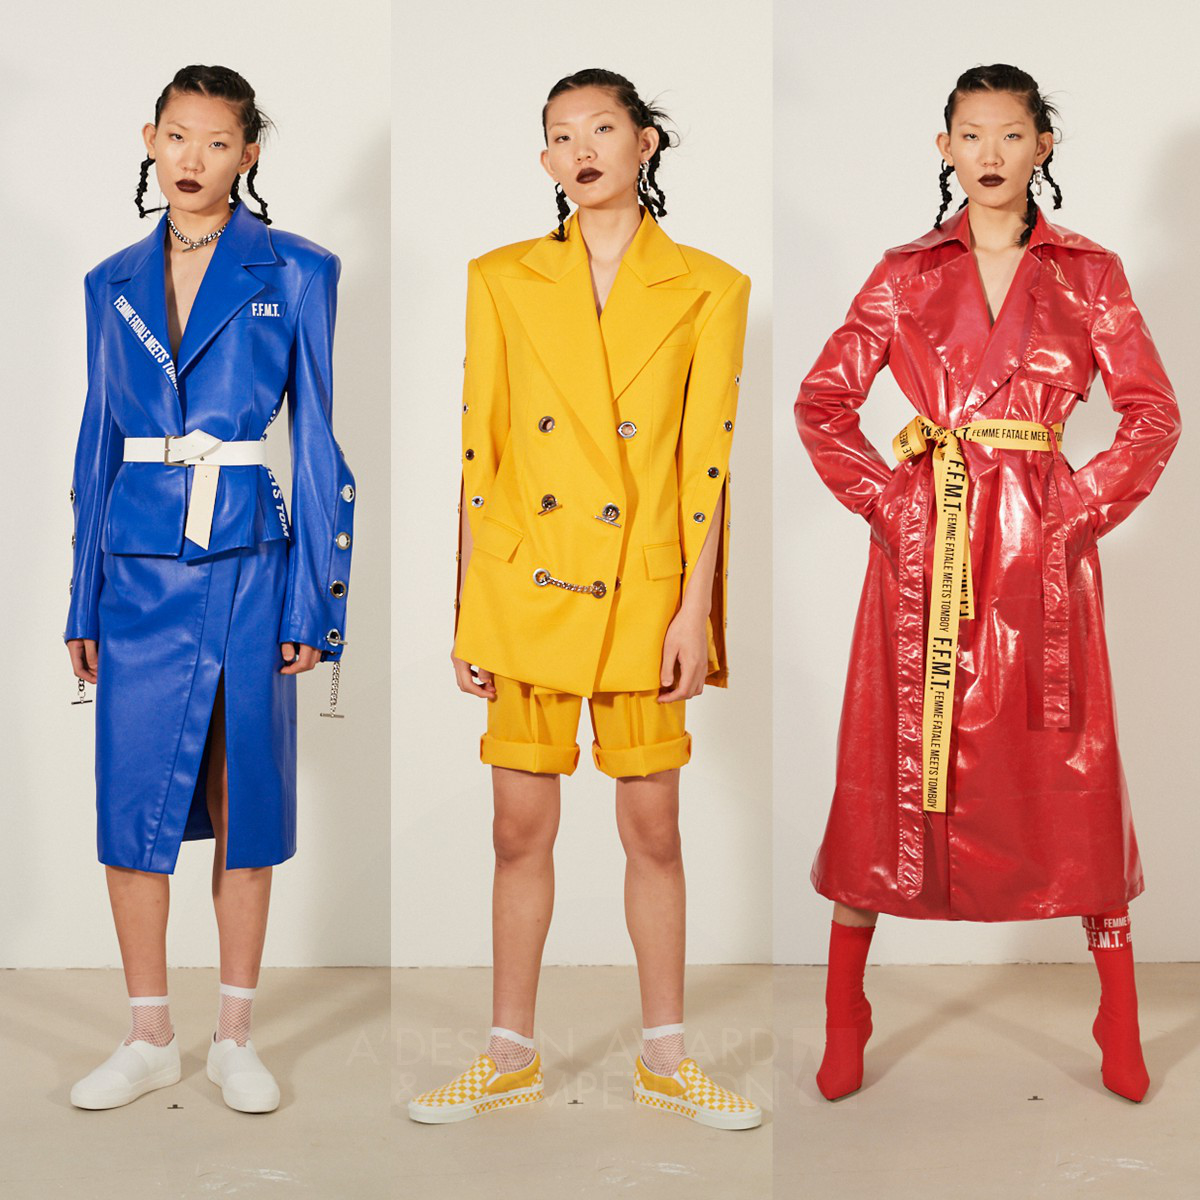 Femme Fatale Meets Tomboy Ready-to-Wear Collection for Women by Chae Yoon Yoo